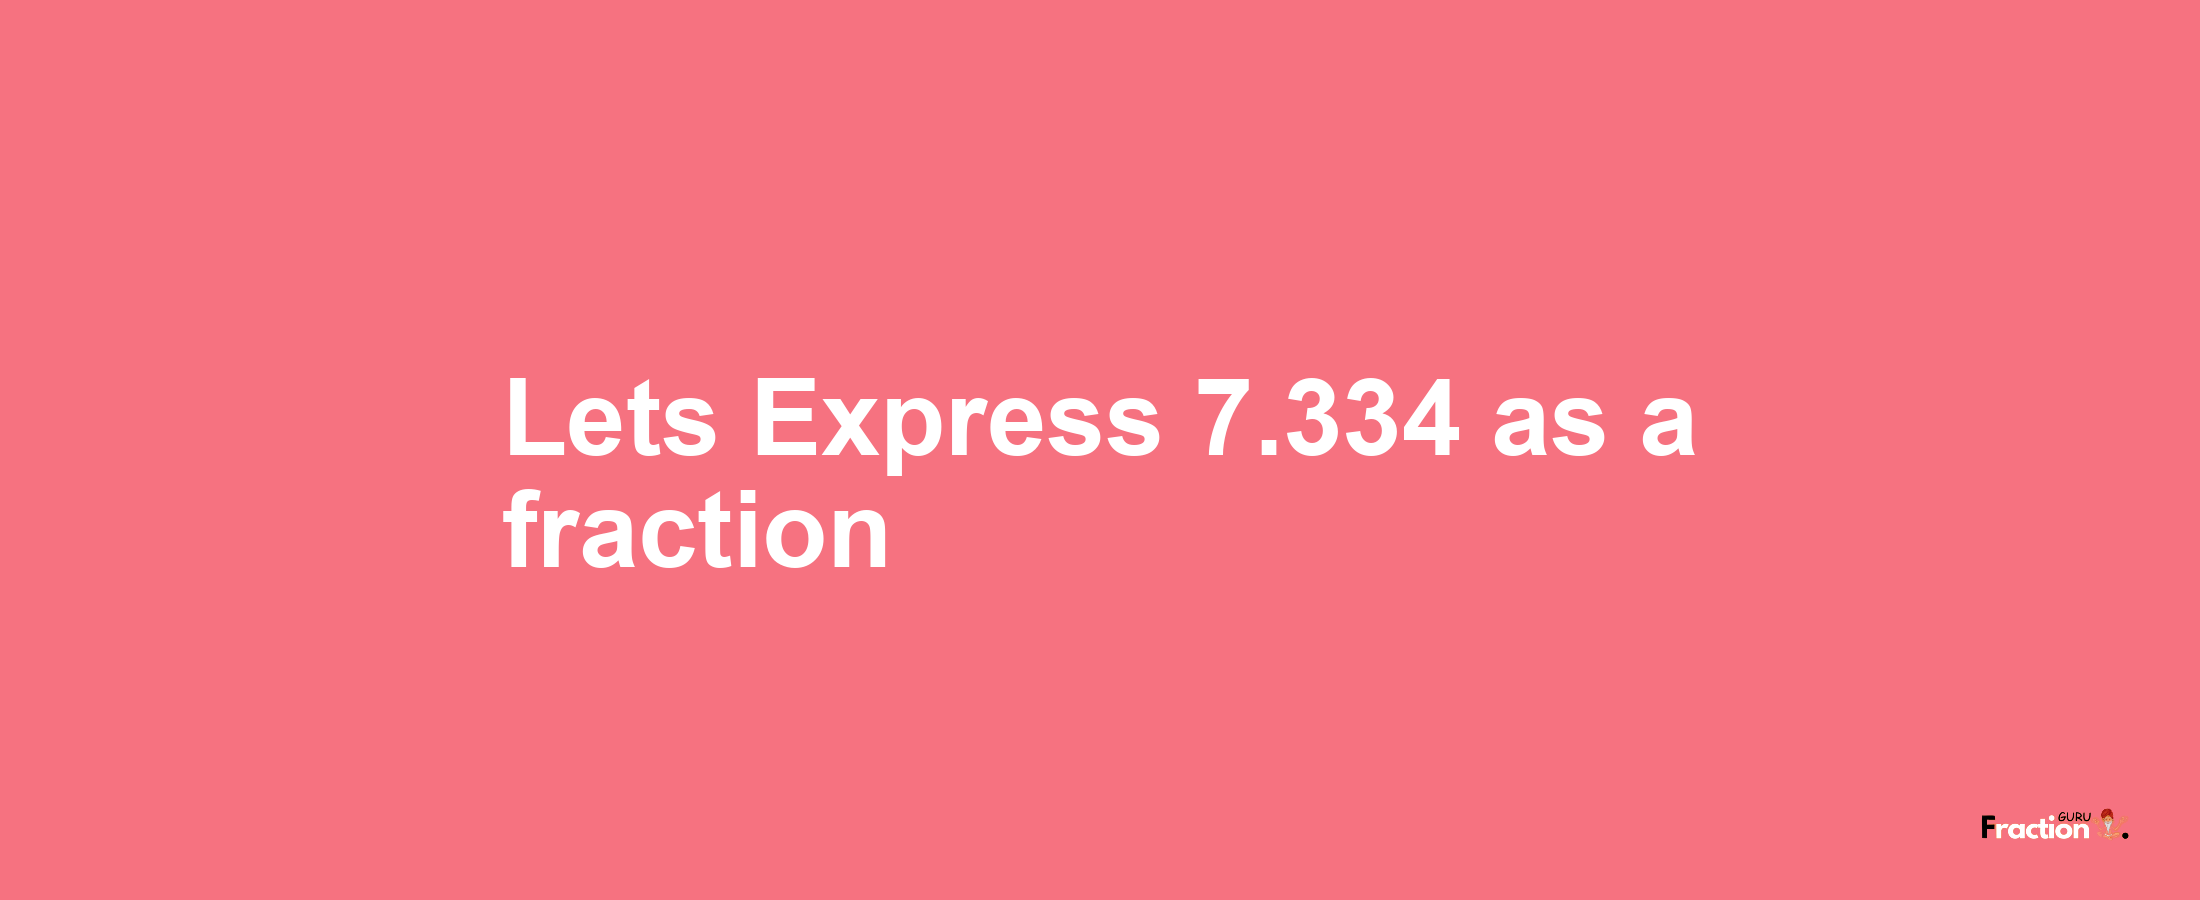 Lets Express 7.334 as afraction